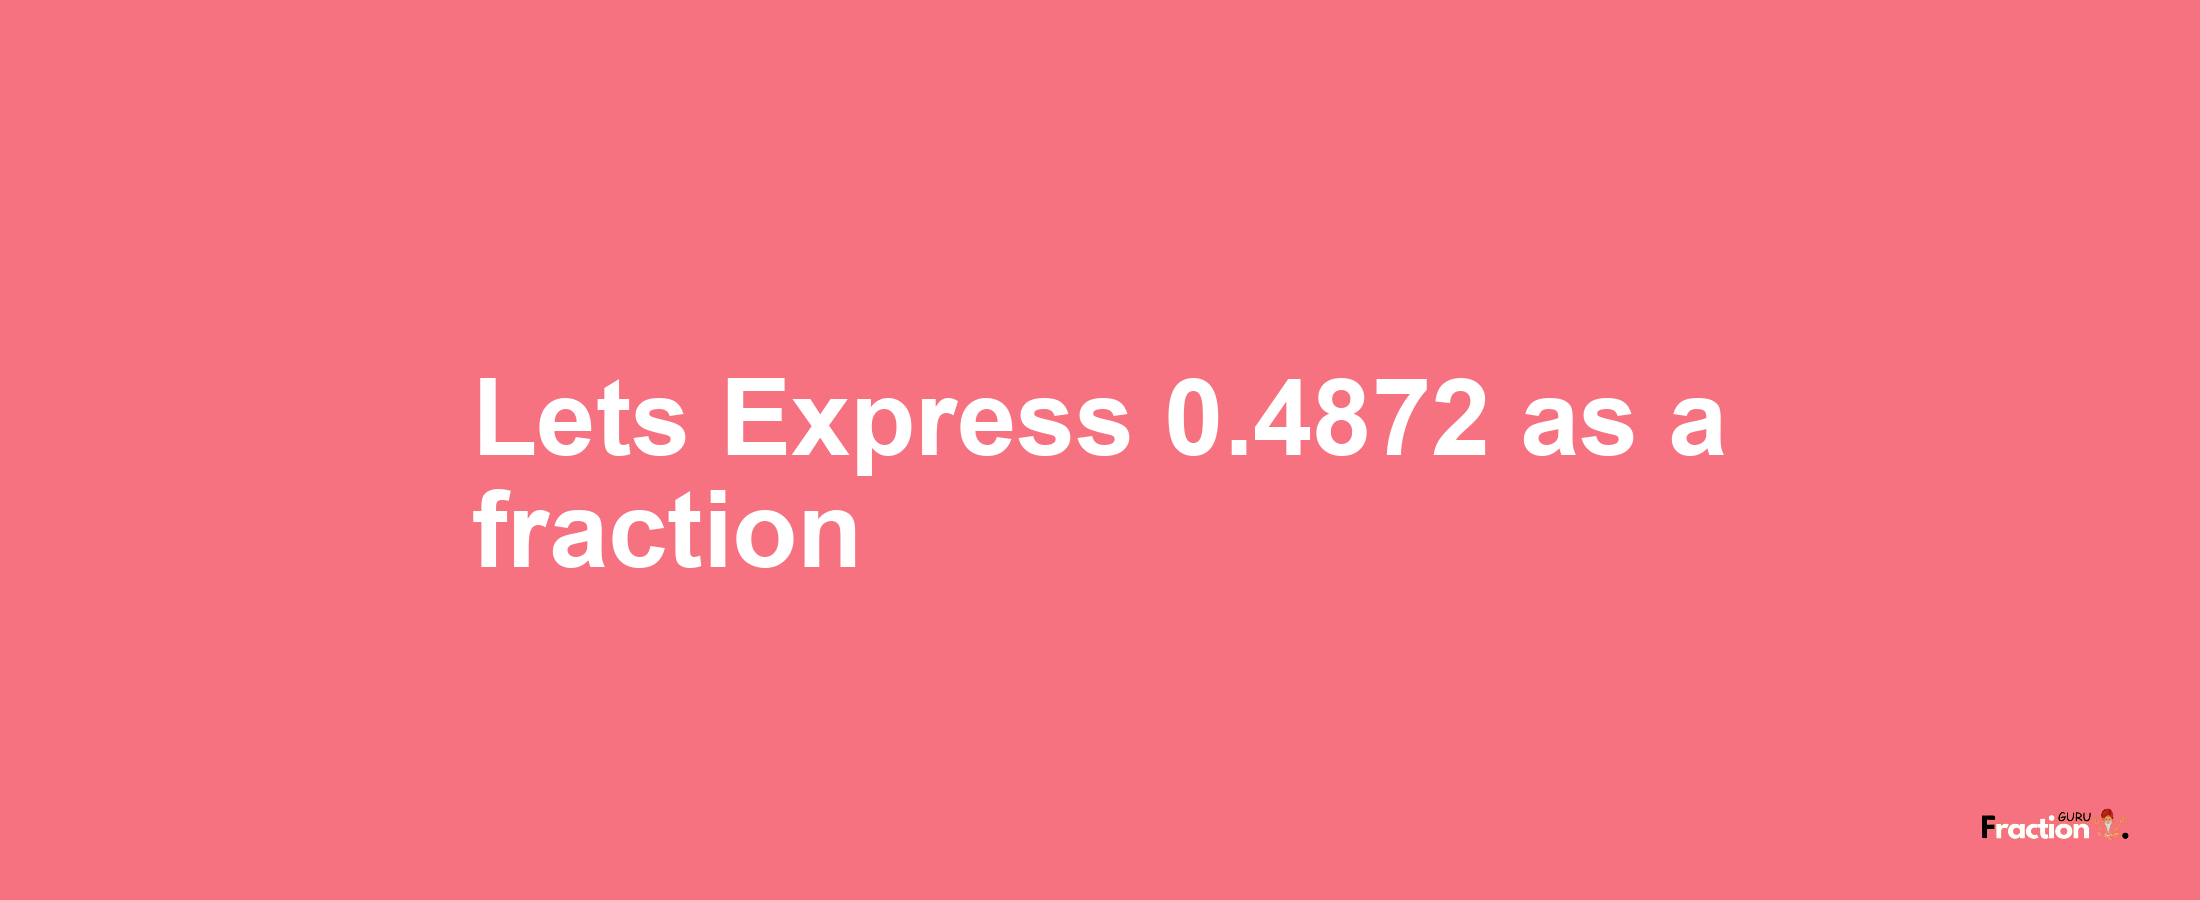 Lets Express 0.4872 as afraction